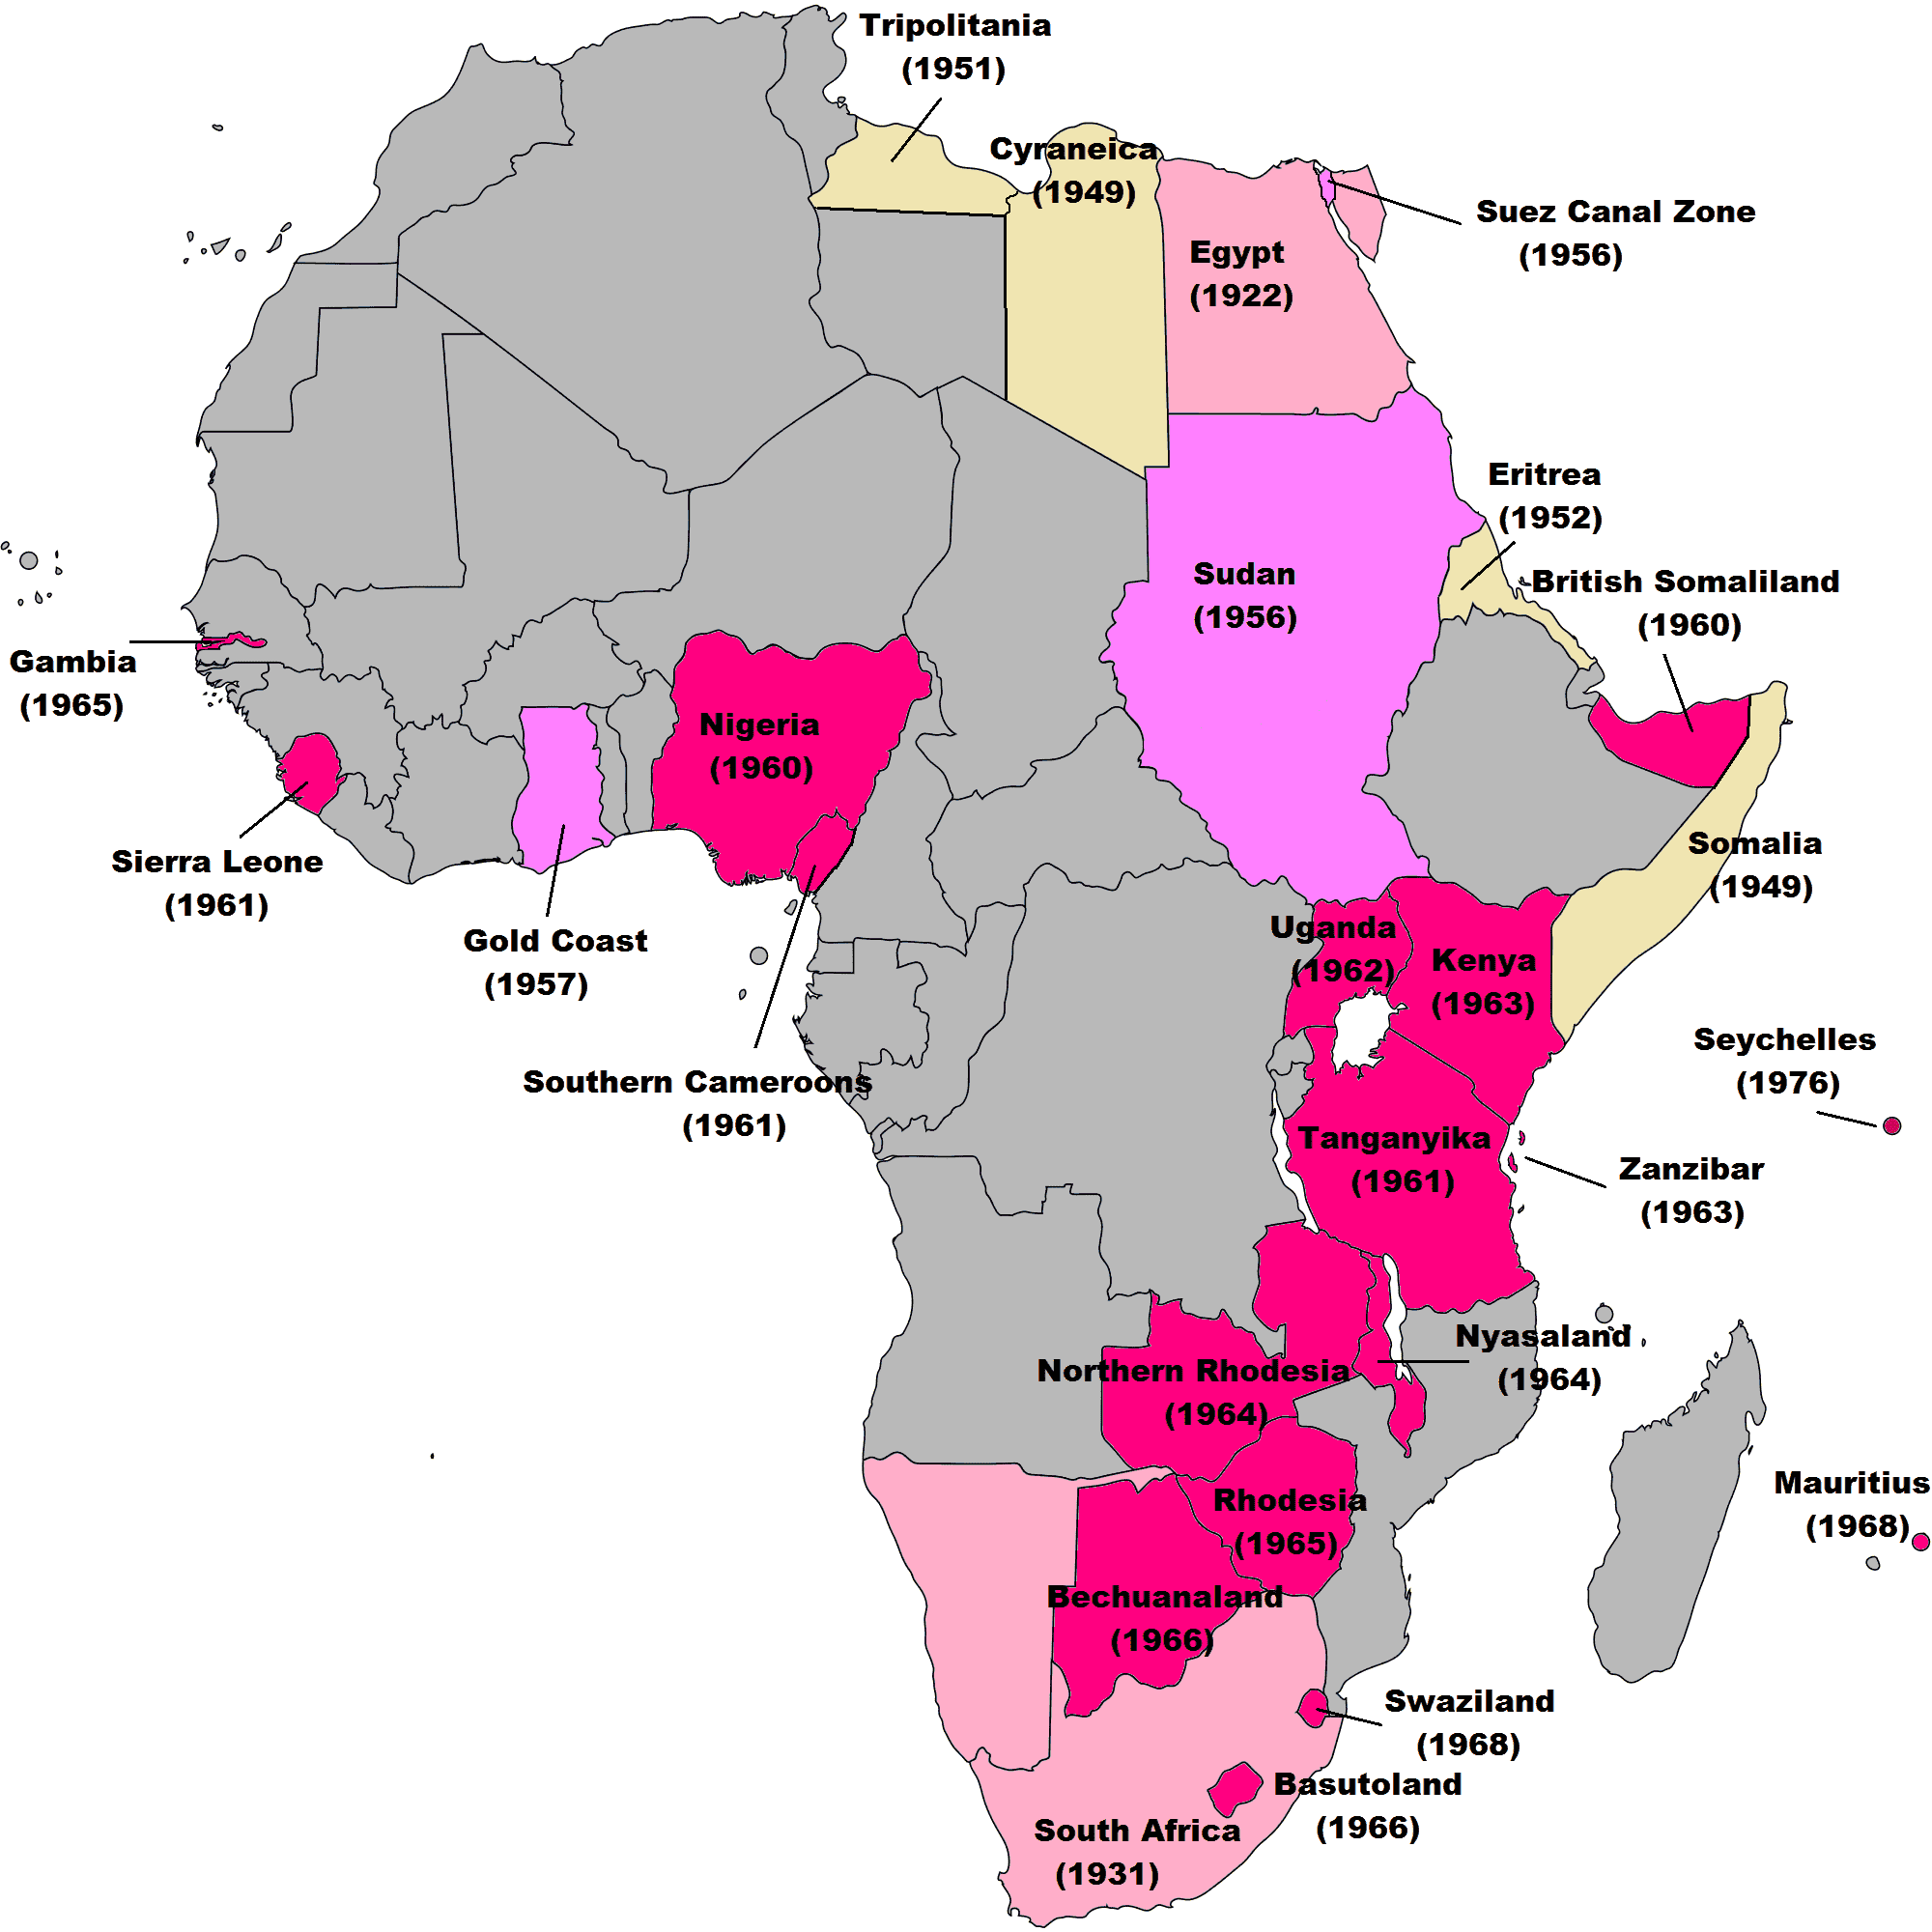 British Colonies through the African continent